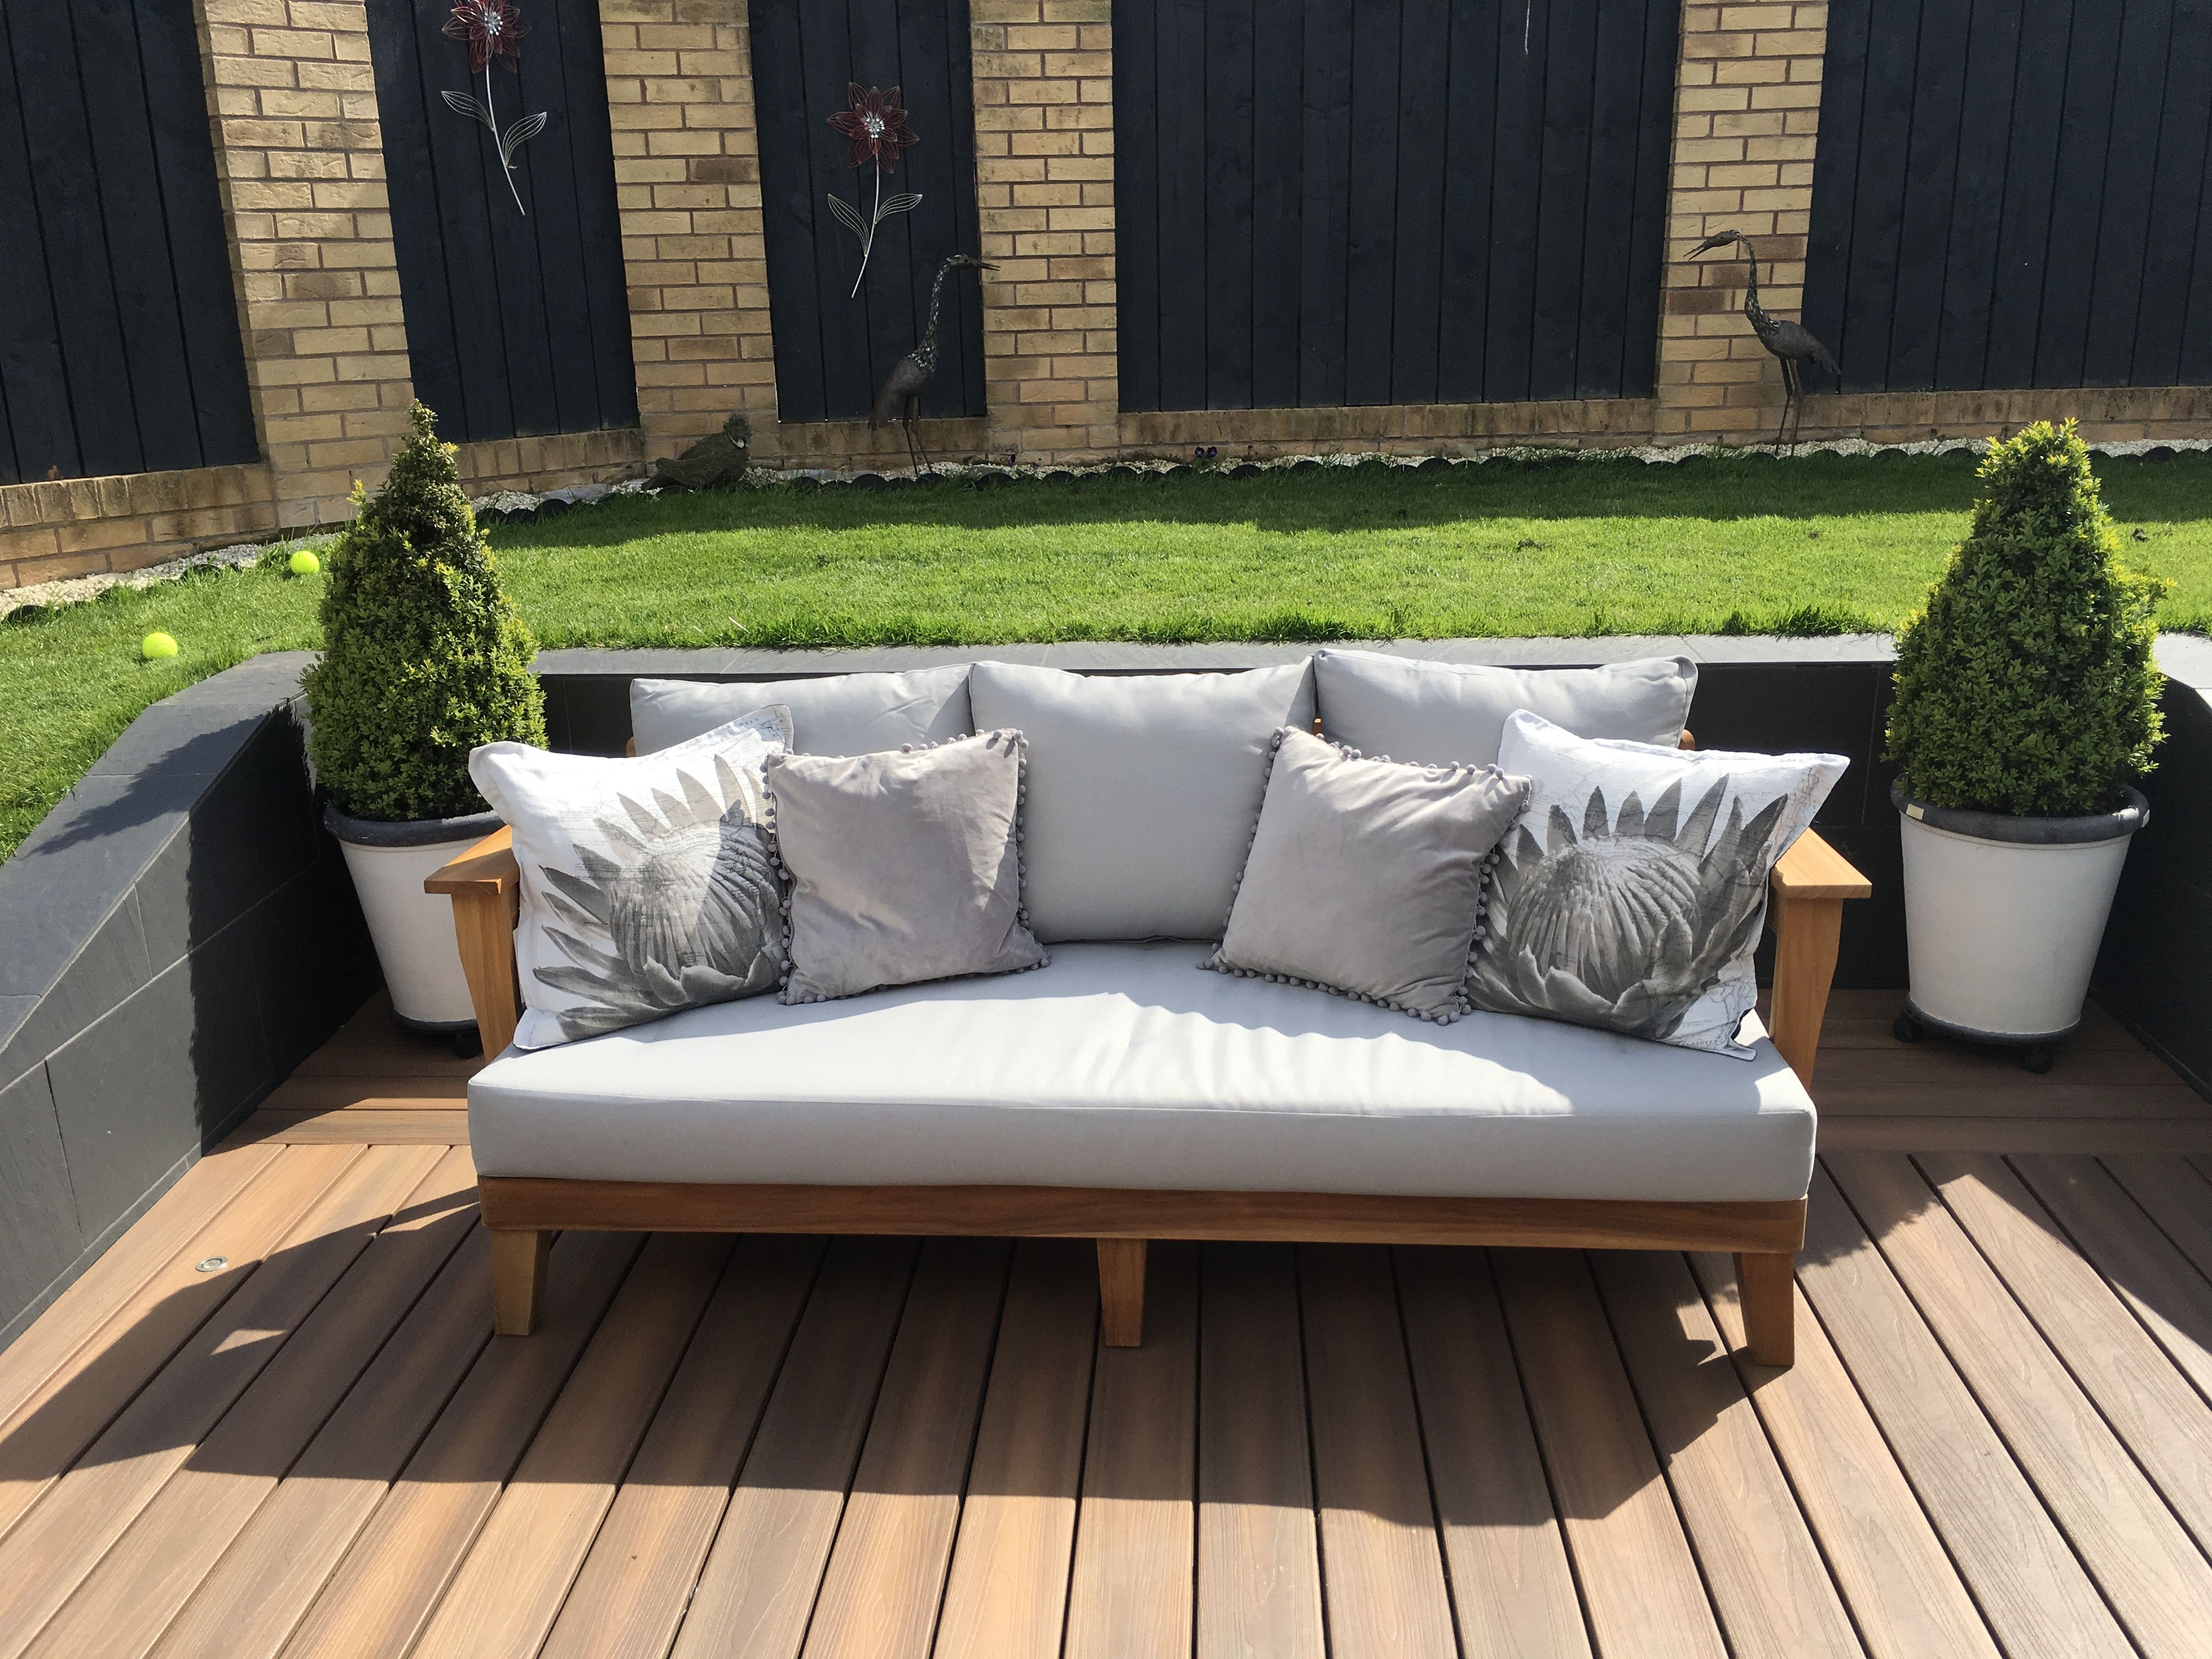 Create A Cozy Outdoor Seating Area With A Teak Sofa